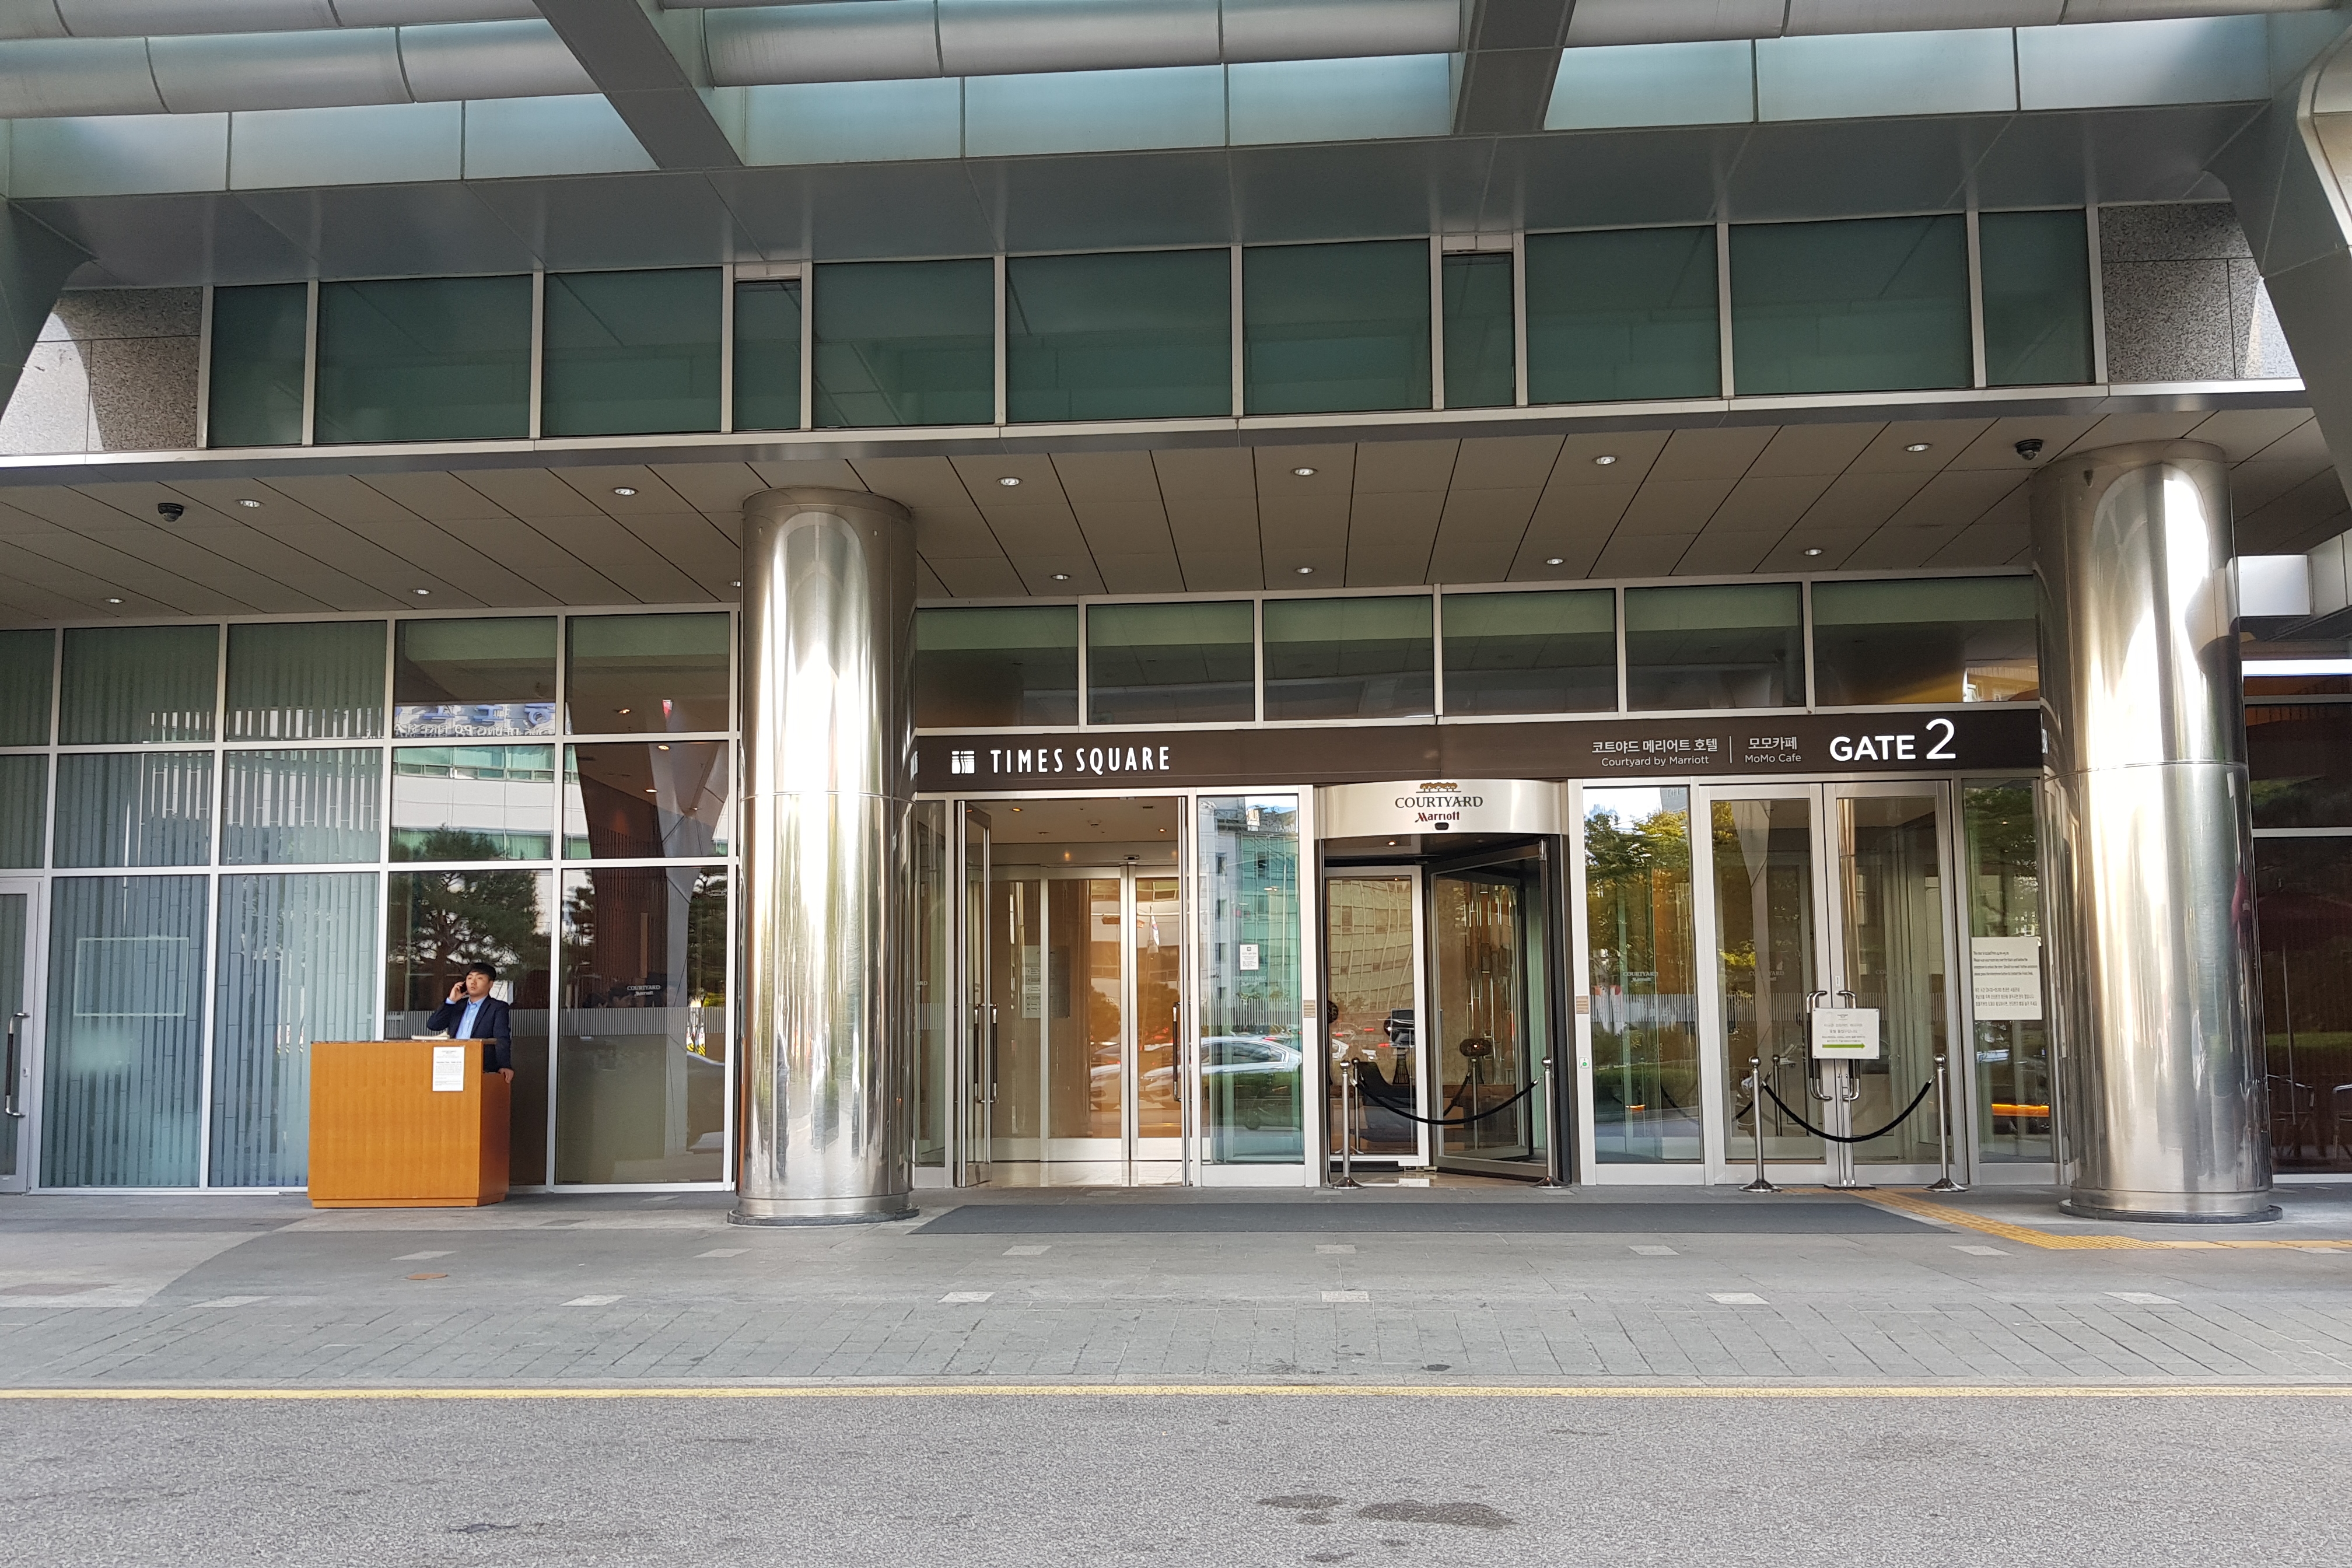 Courtyard by Marriott Seoul Times Square1 : Hotel main entrance with thick metal circular pillars at both ends